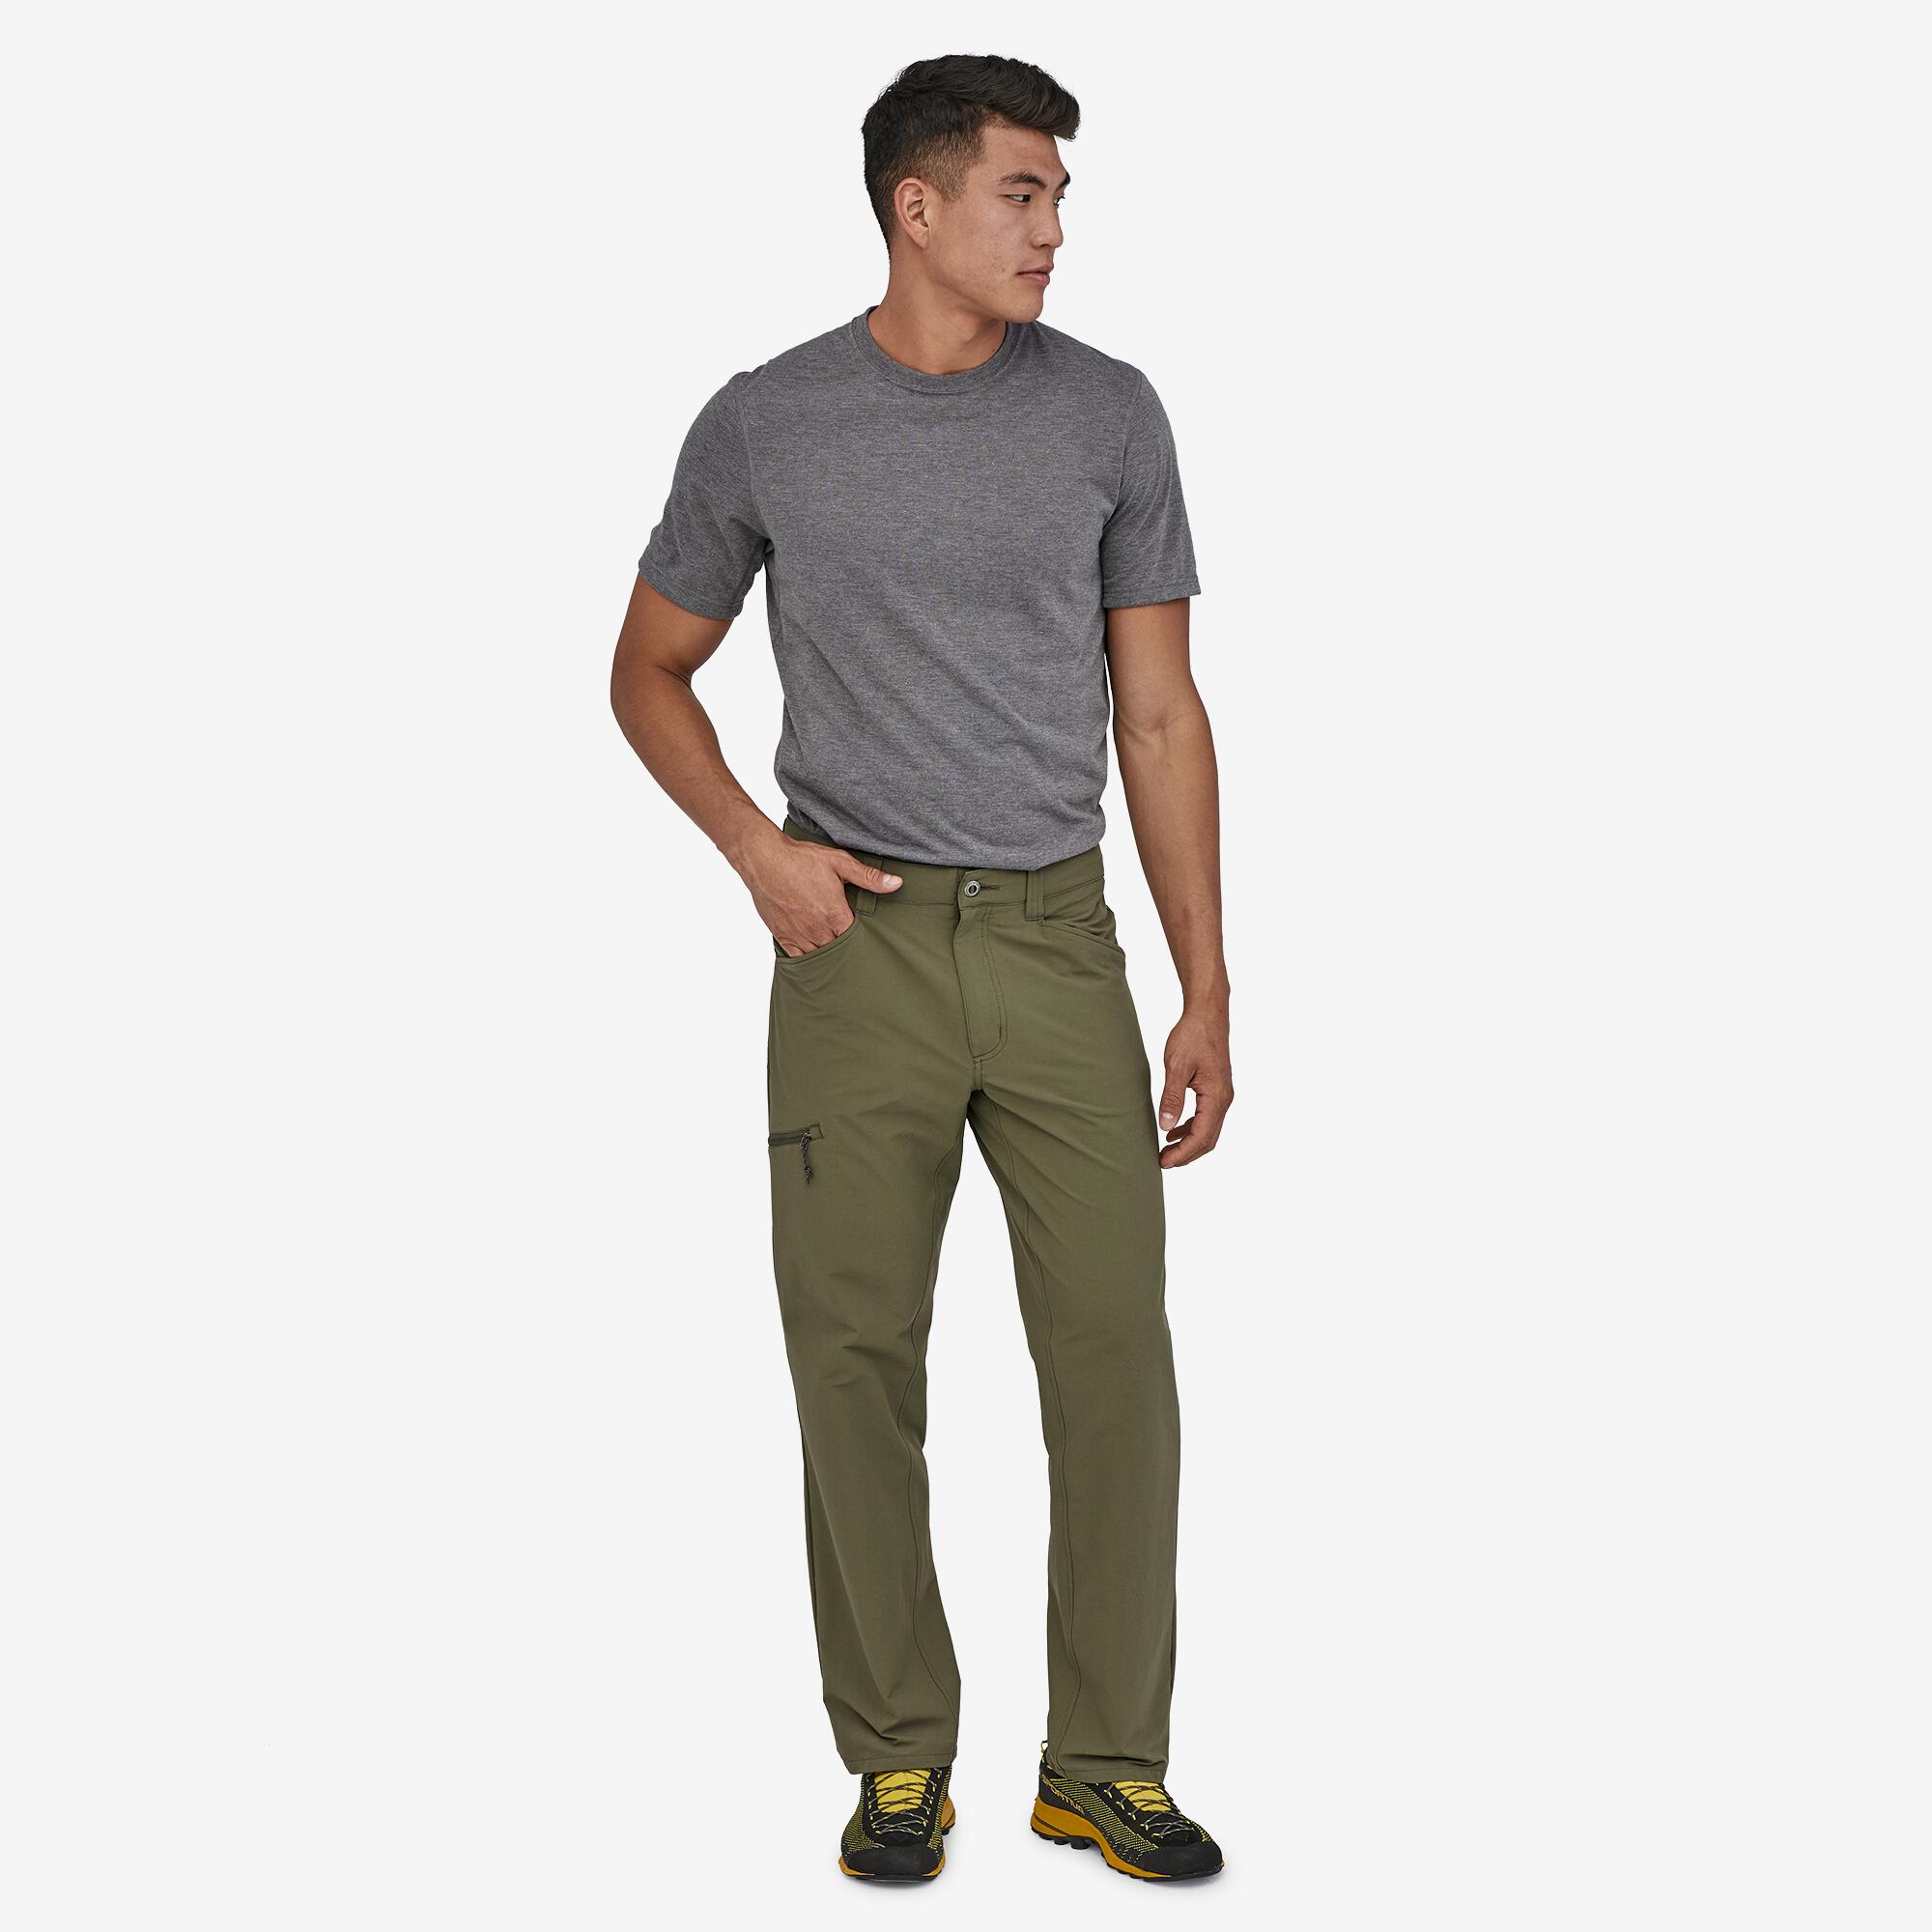 6 Best Men's Travel Pants In 2023 - The Event Chronicle